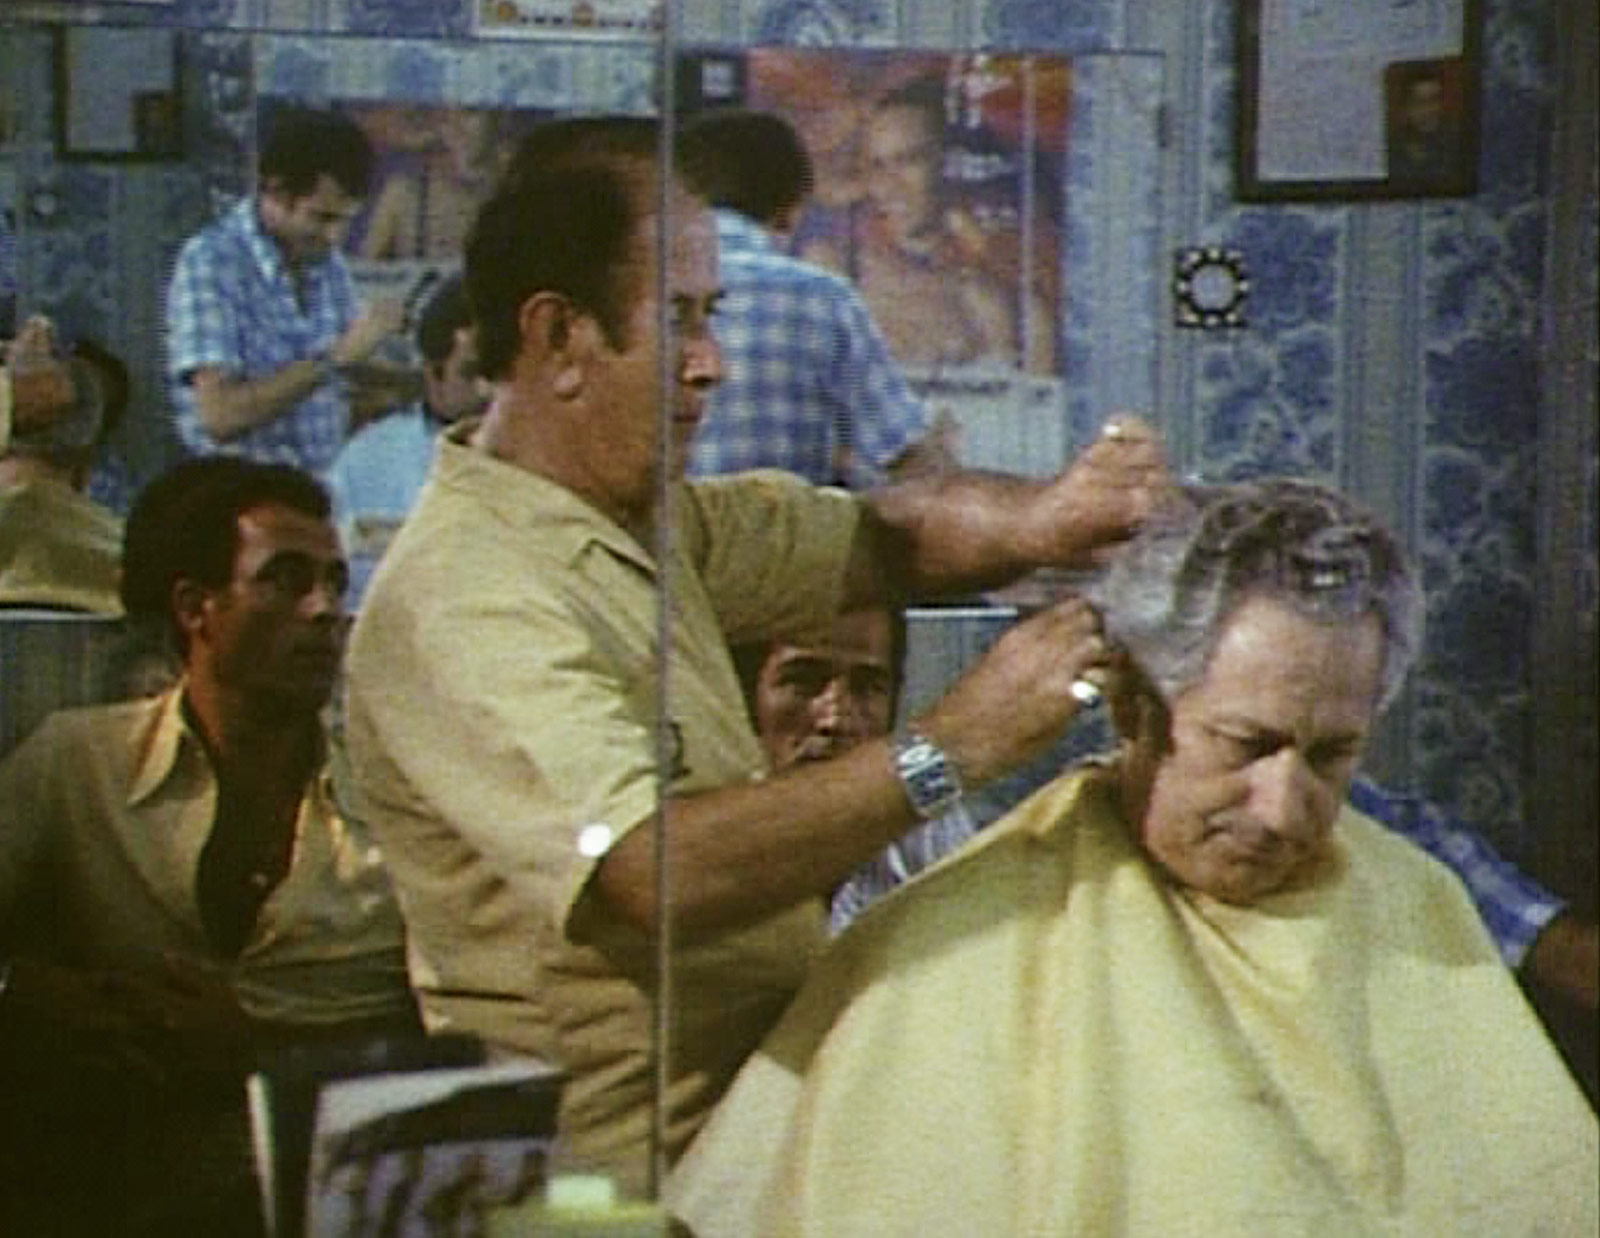 Still from the nineteen eighty five film “Shoah,” by Claude Lanzmann, depicting a scene in a barber shop from various angles.